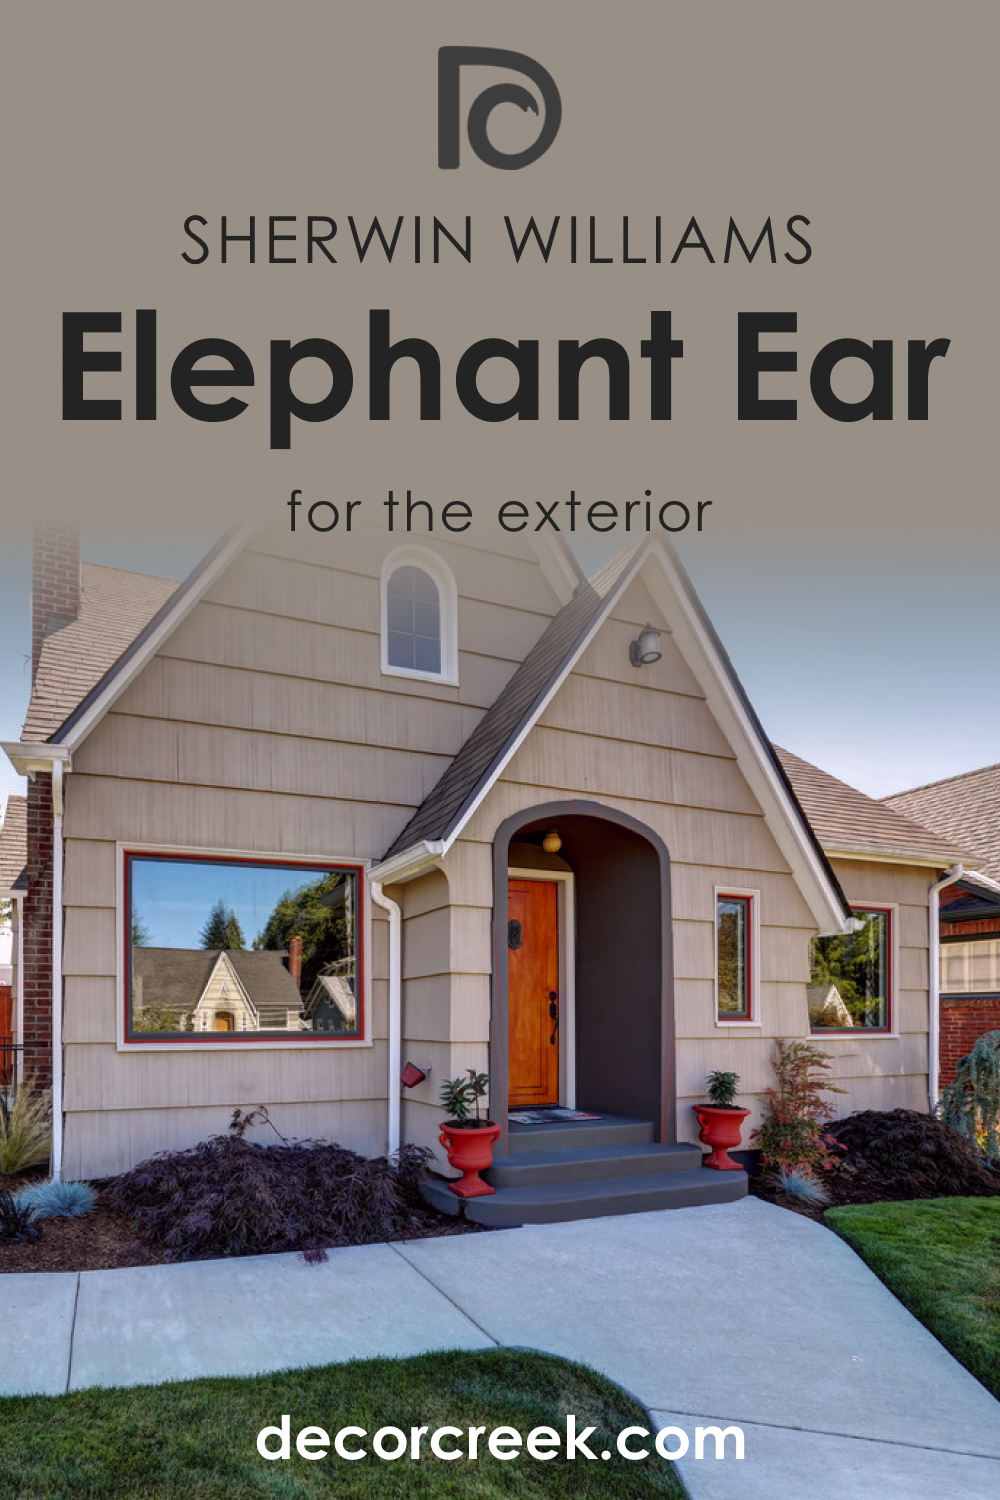 How to Use SW 9168 Elephant Ear for an Exterior?